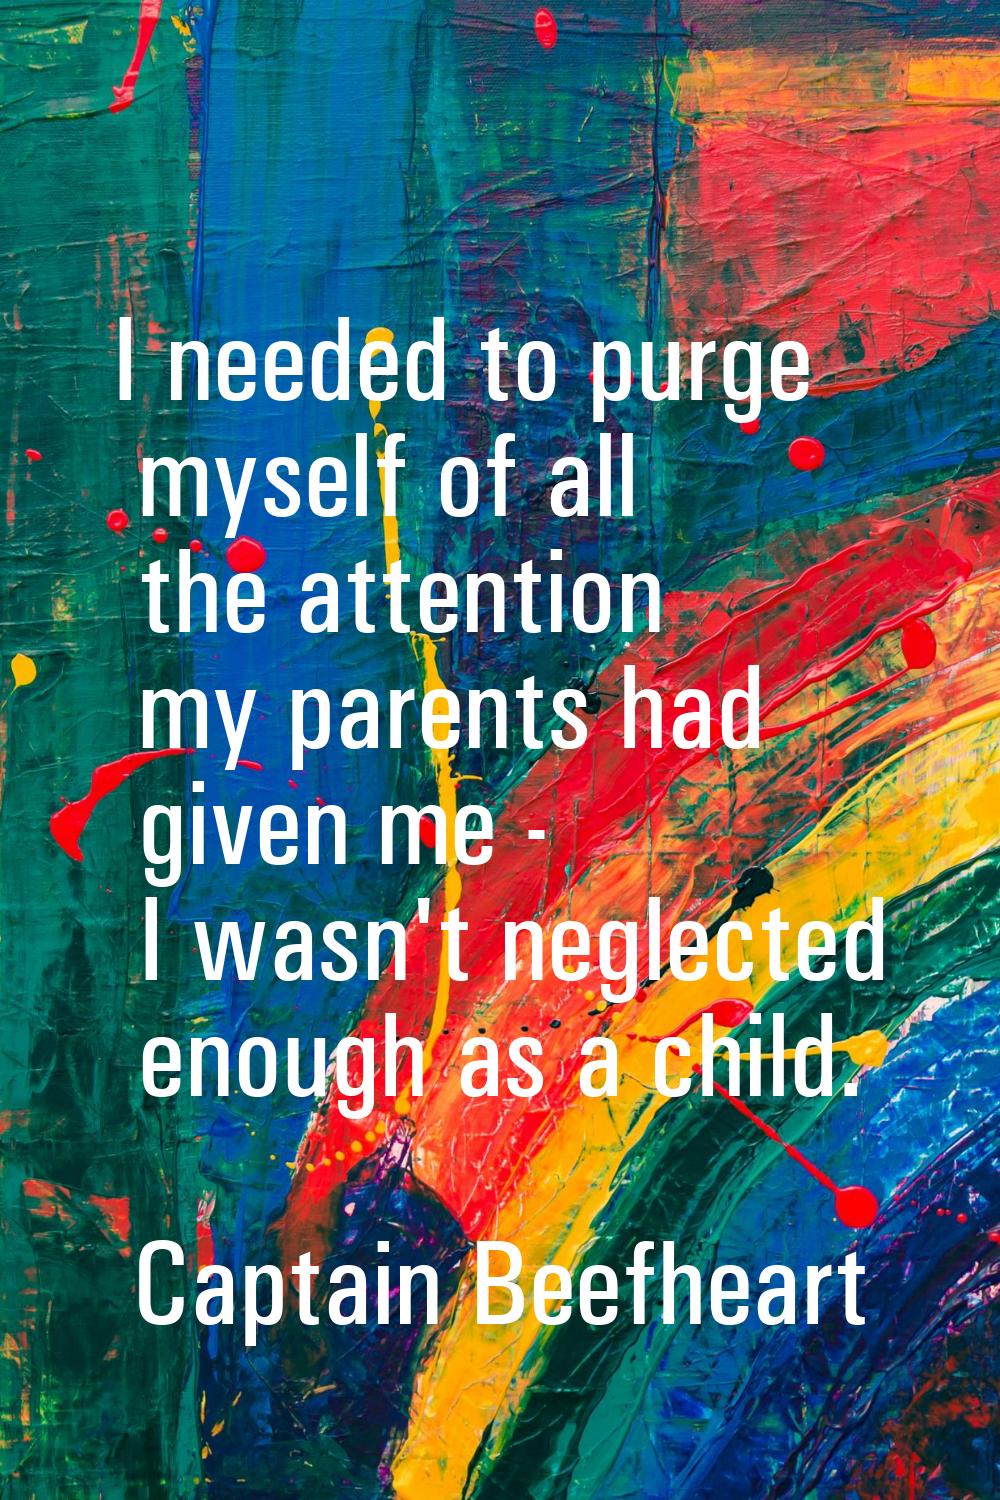 I needed to purge myself of all the attention my parents had given me - I wasn't neglected enough a